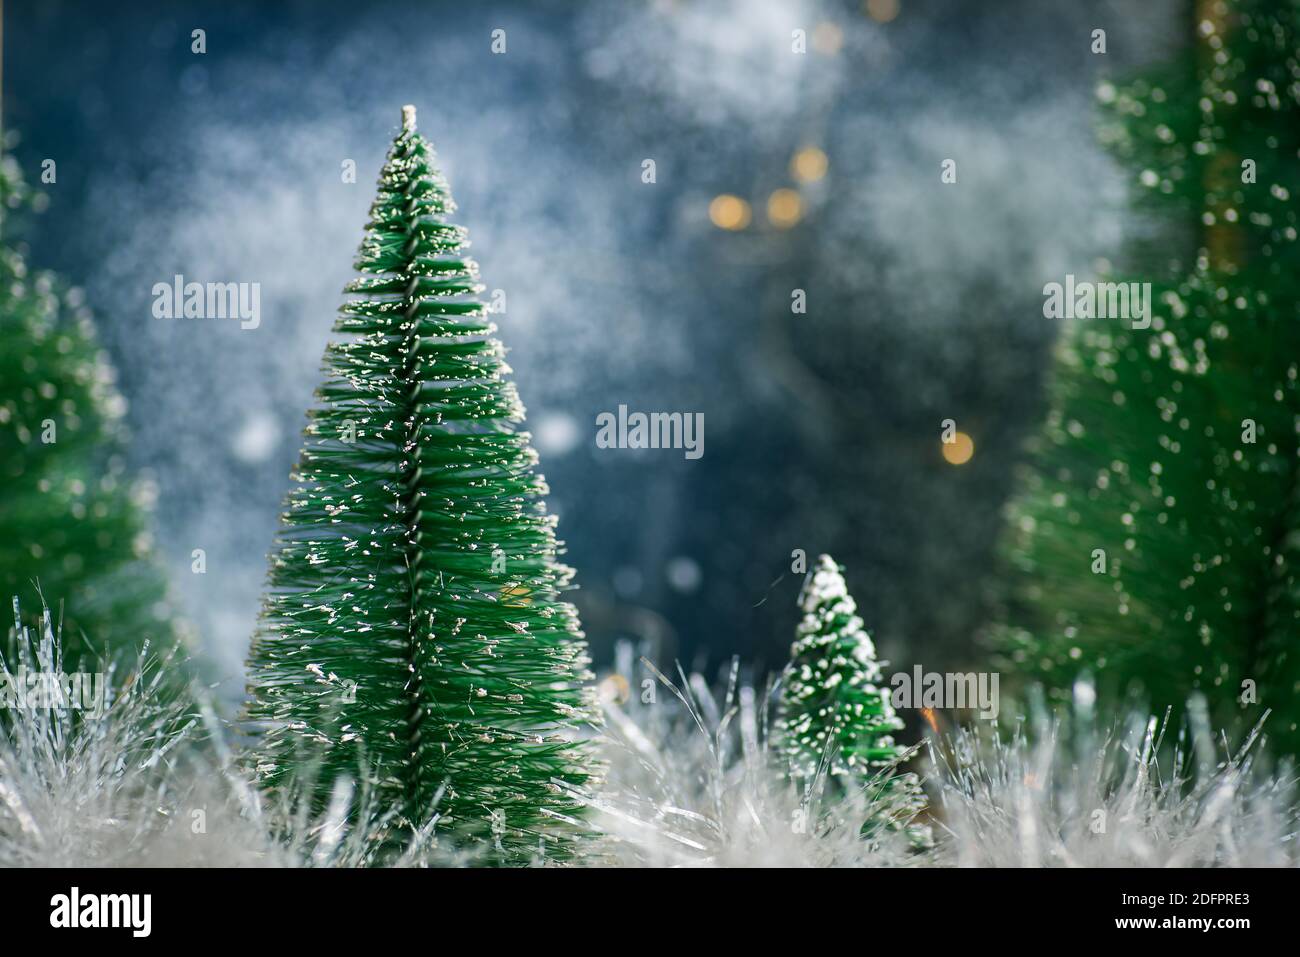 Christmas tree winter holiday festive background and ornaments Stock Photo